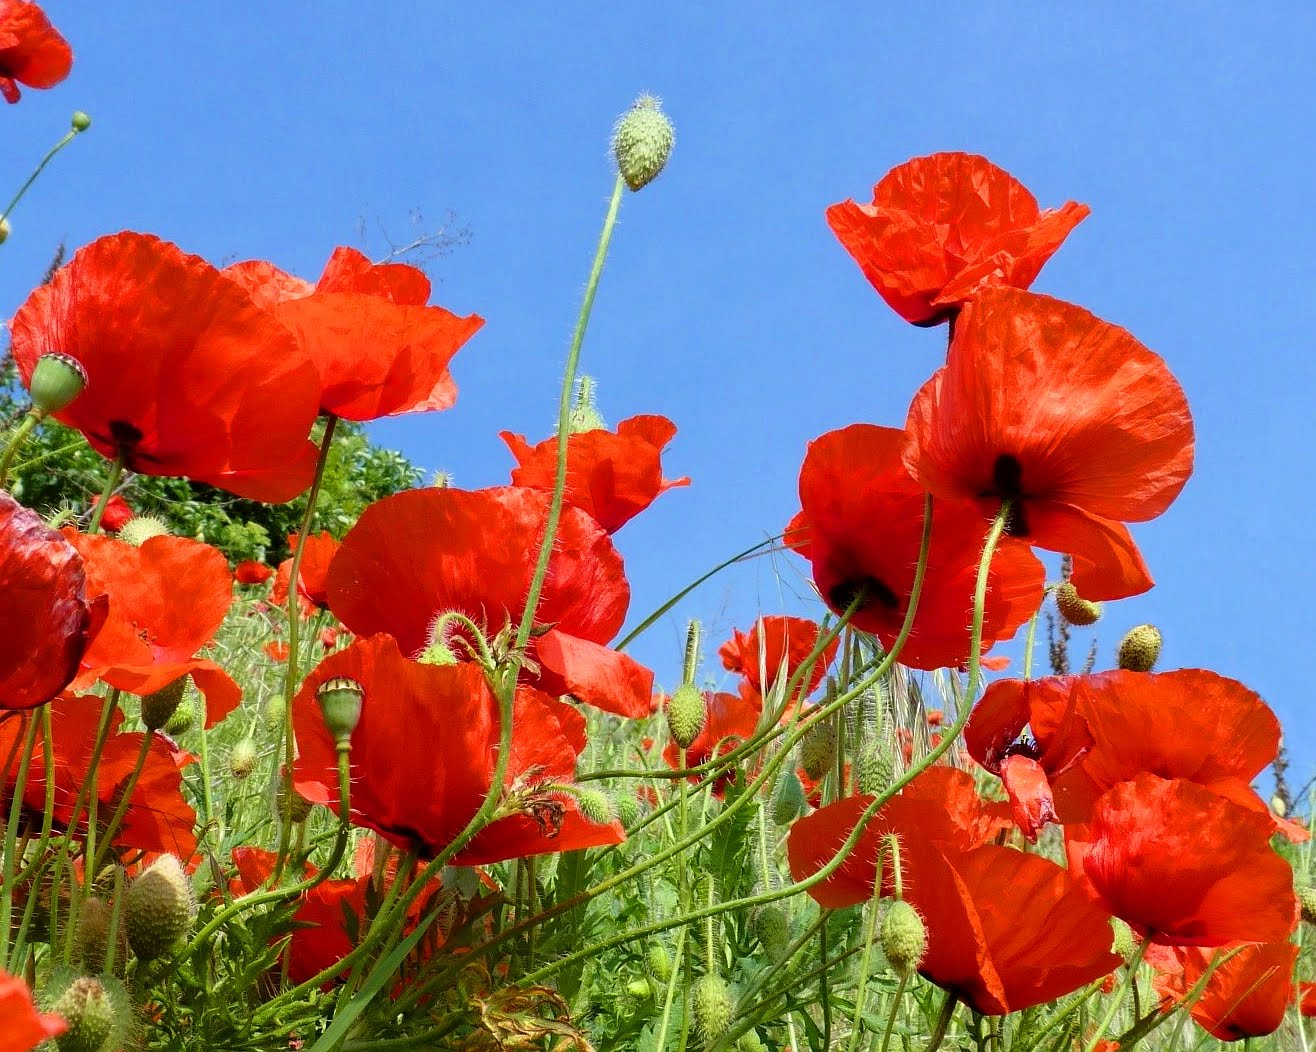 historymike: Red Poppies